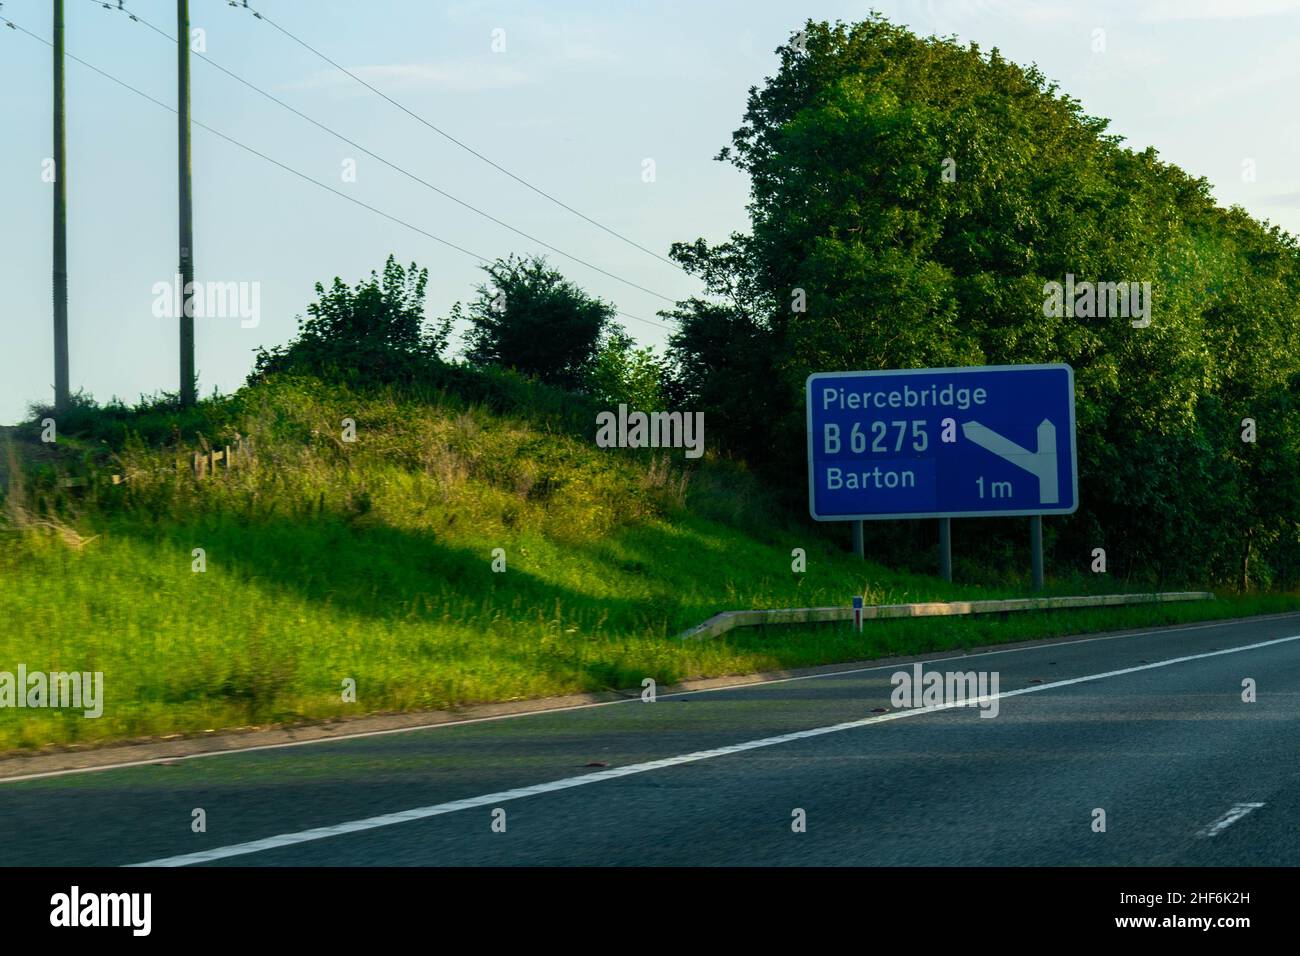 Blue British Motorway sign with space for copy text on the A1 motorway directing traffic drivers towards Piercebridge and Barton, B6265. Junction. Tra Stock Photo